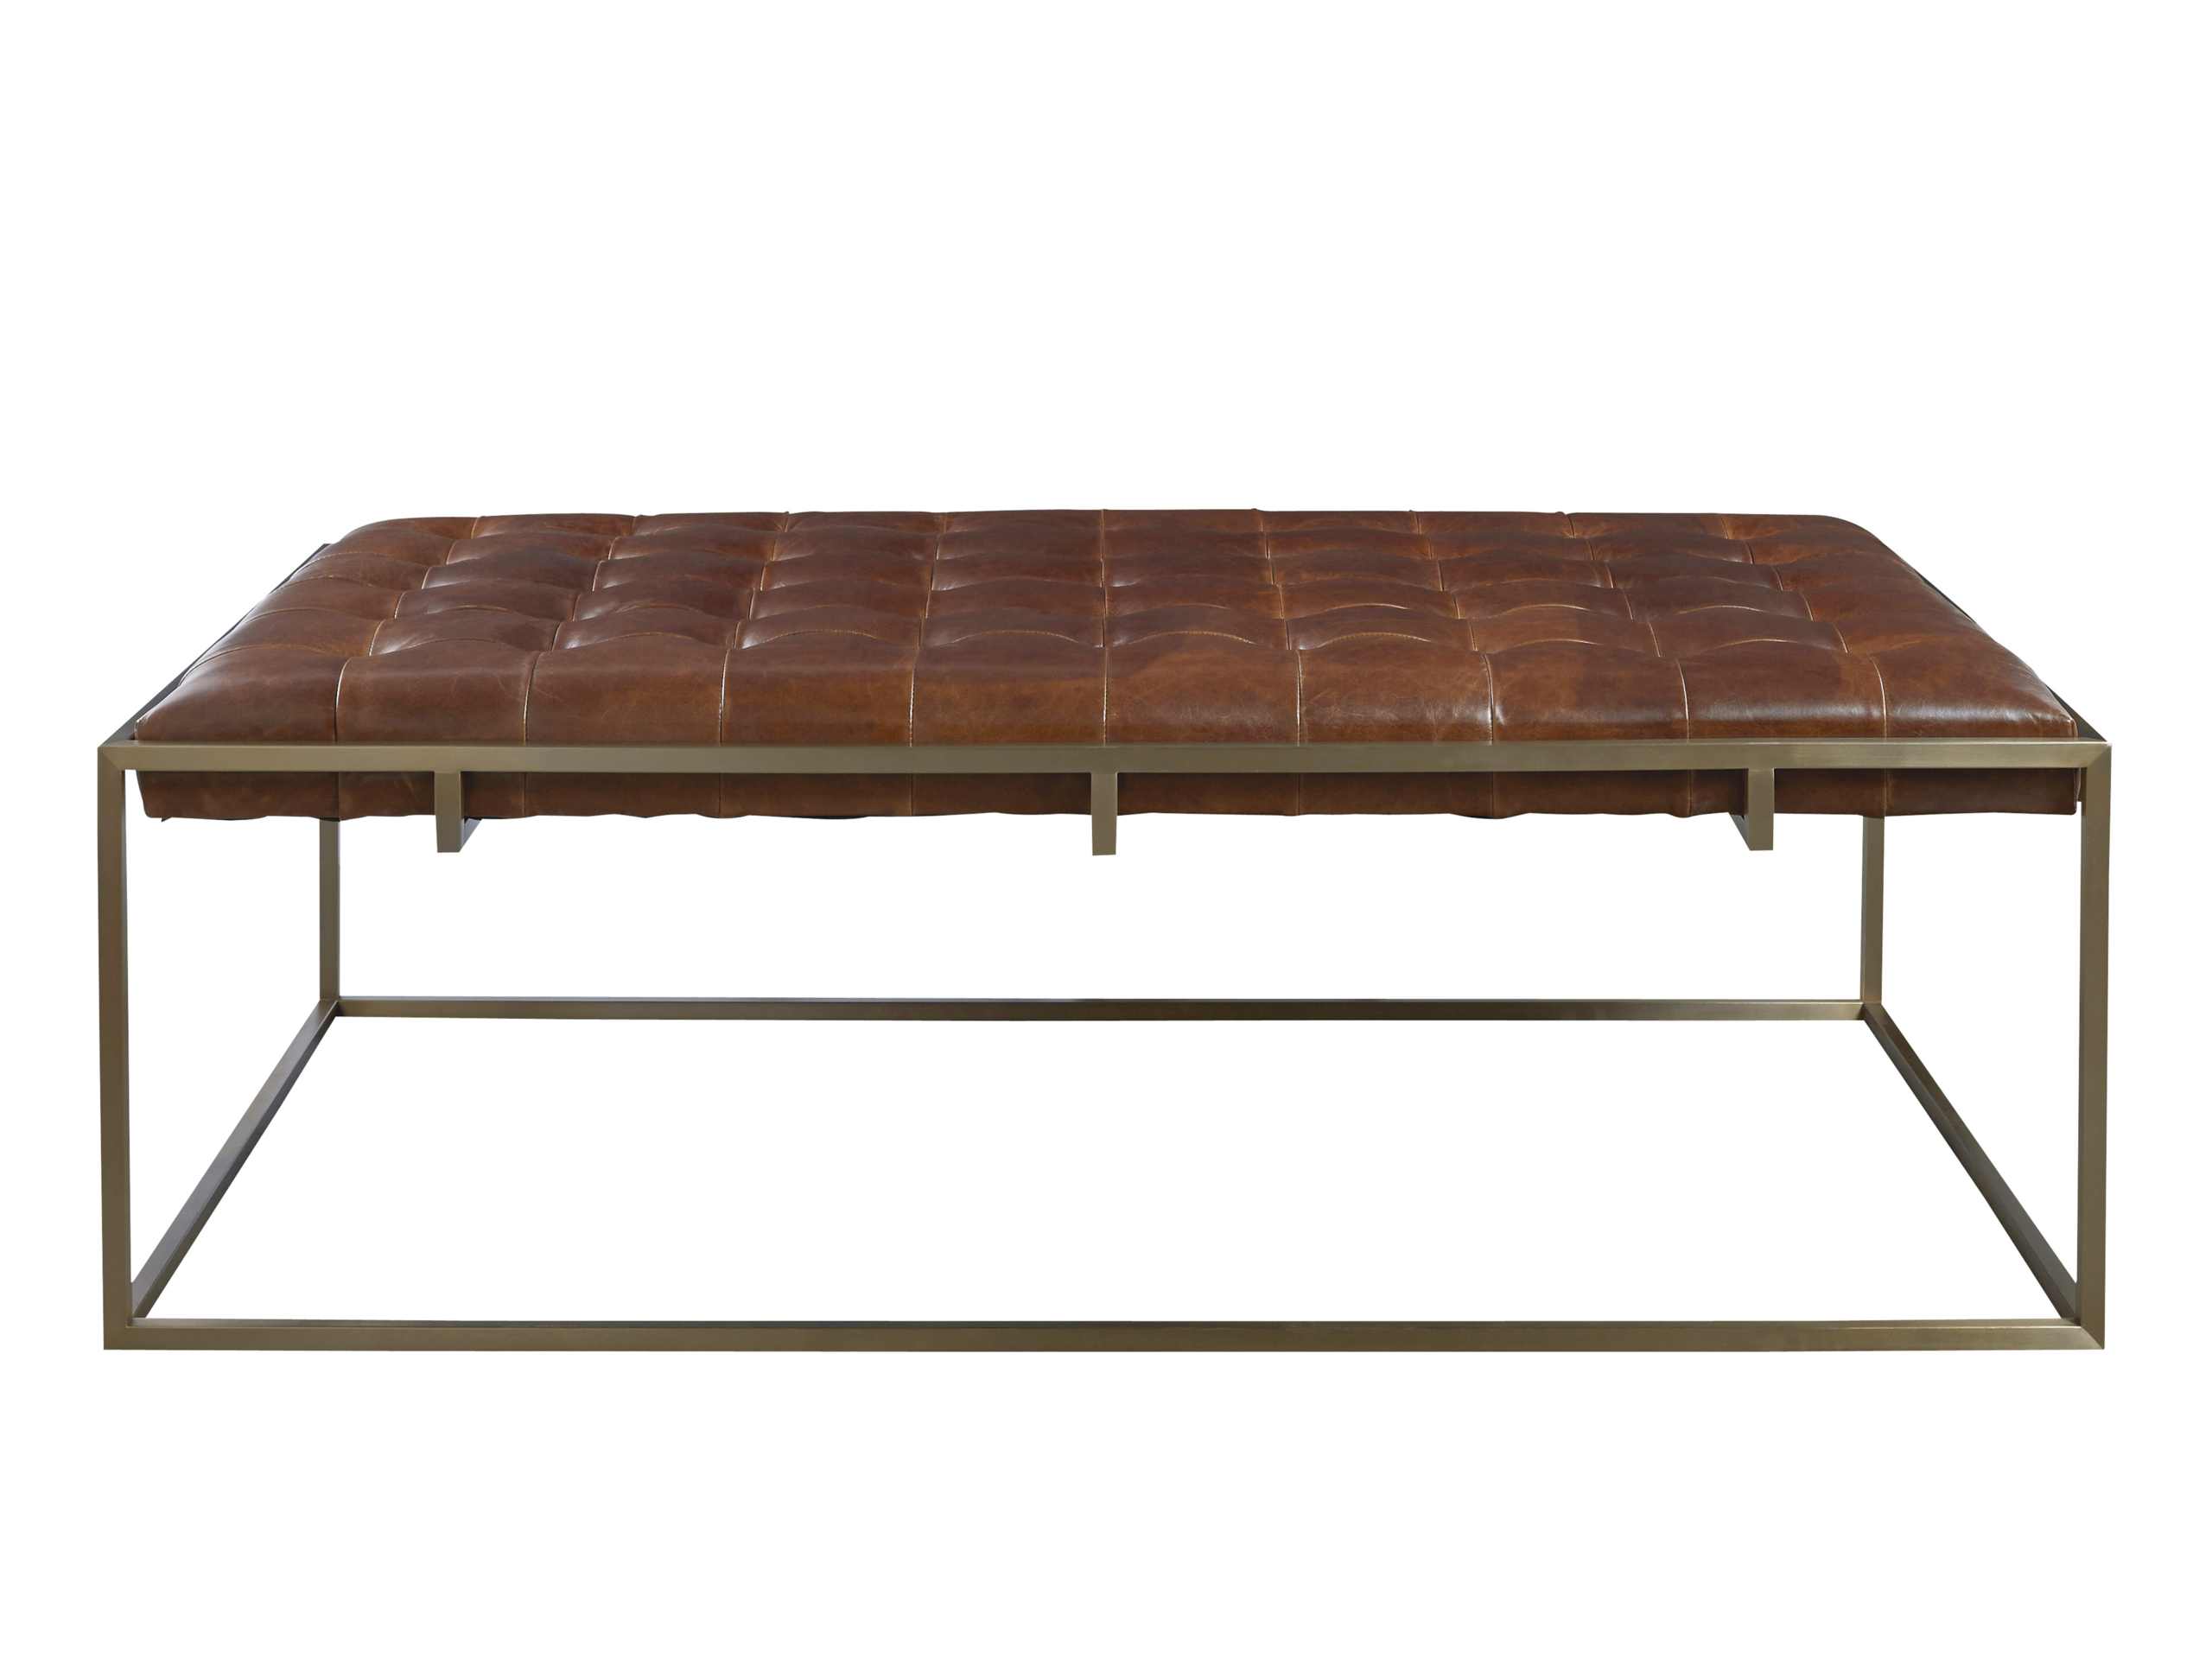 Leather Ottoman Coffee Table Youll Love In 2021 Visualhunt